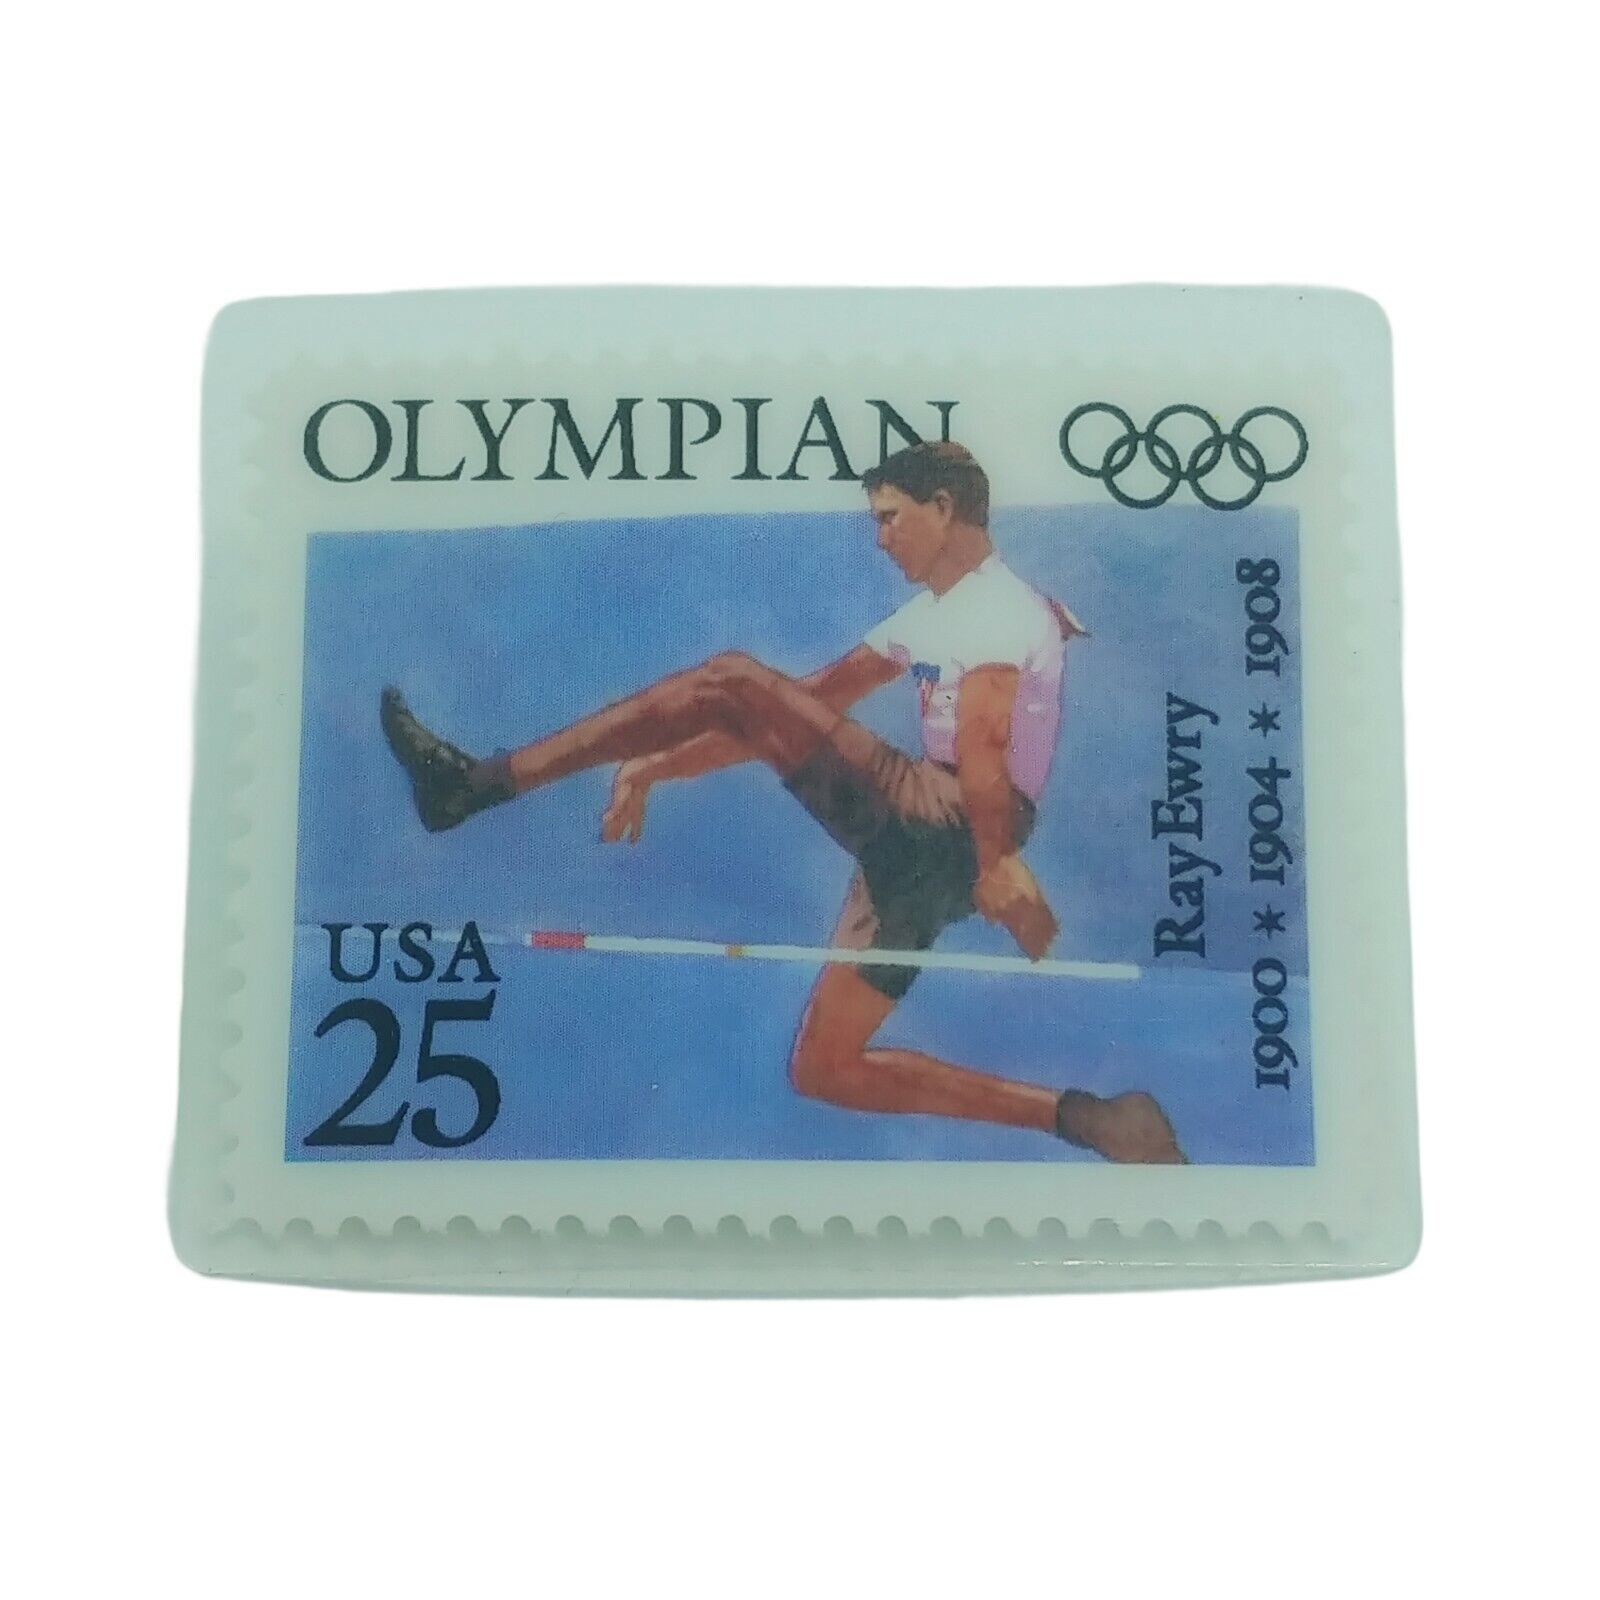 LAMINATED USA 25 CENT OLYMPIAN STAMP RAY EWRY PIN - Track Field Olympic Rings